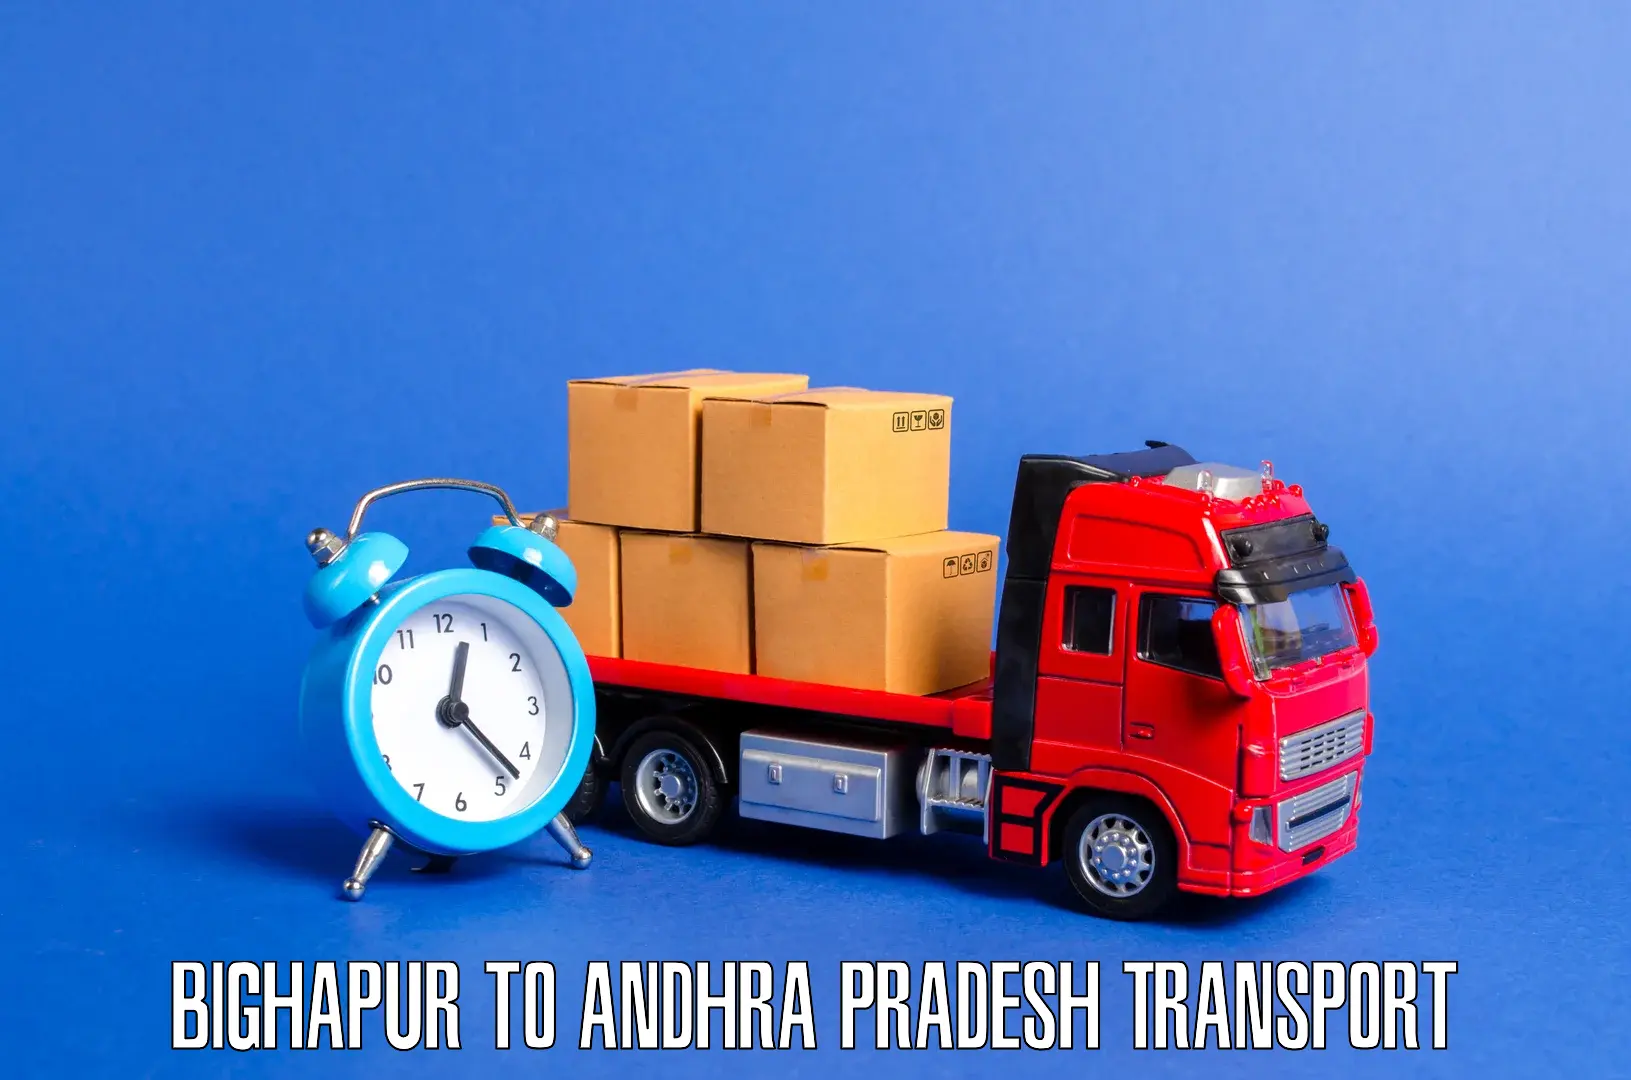 Transport bike from one state to another Bighapur to Eluru